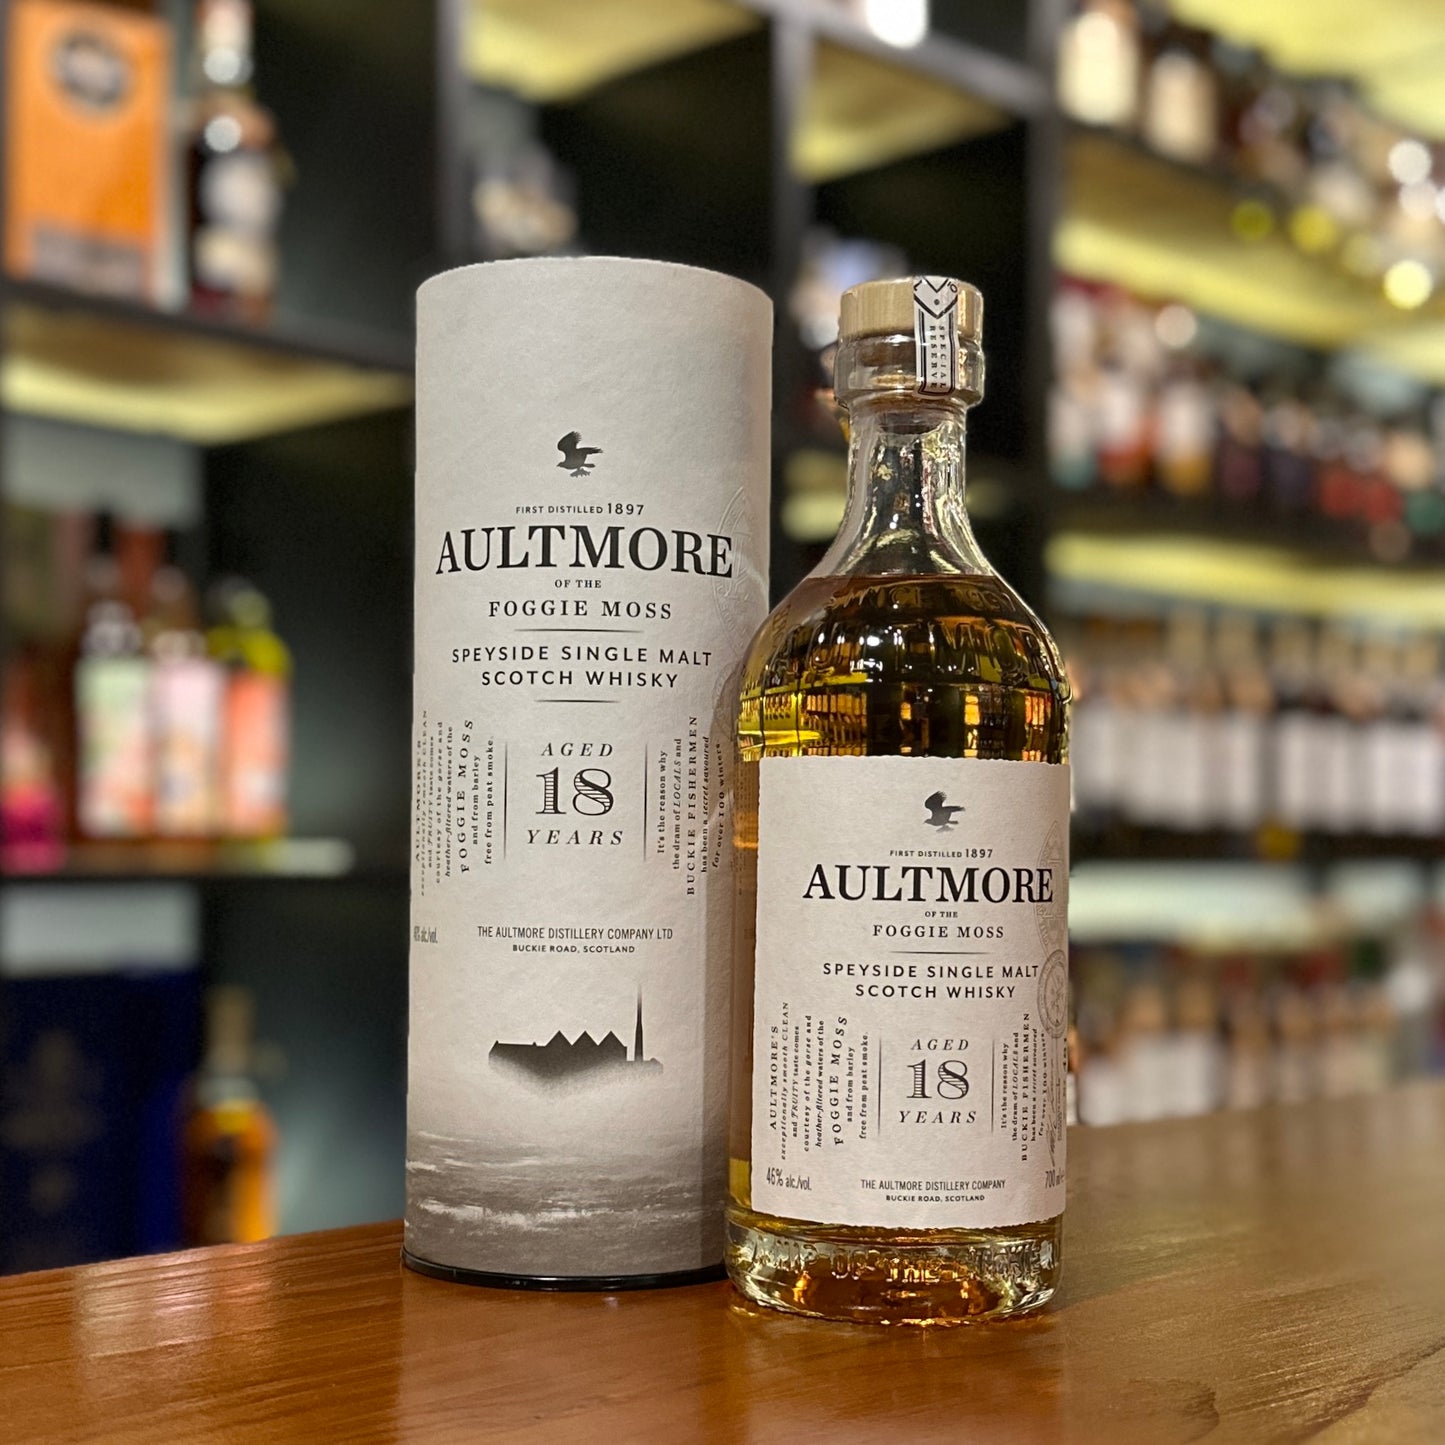 Aultmore 18 Year Old Single Malt Scotch Whisky